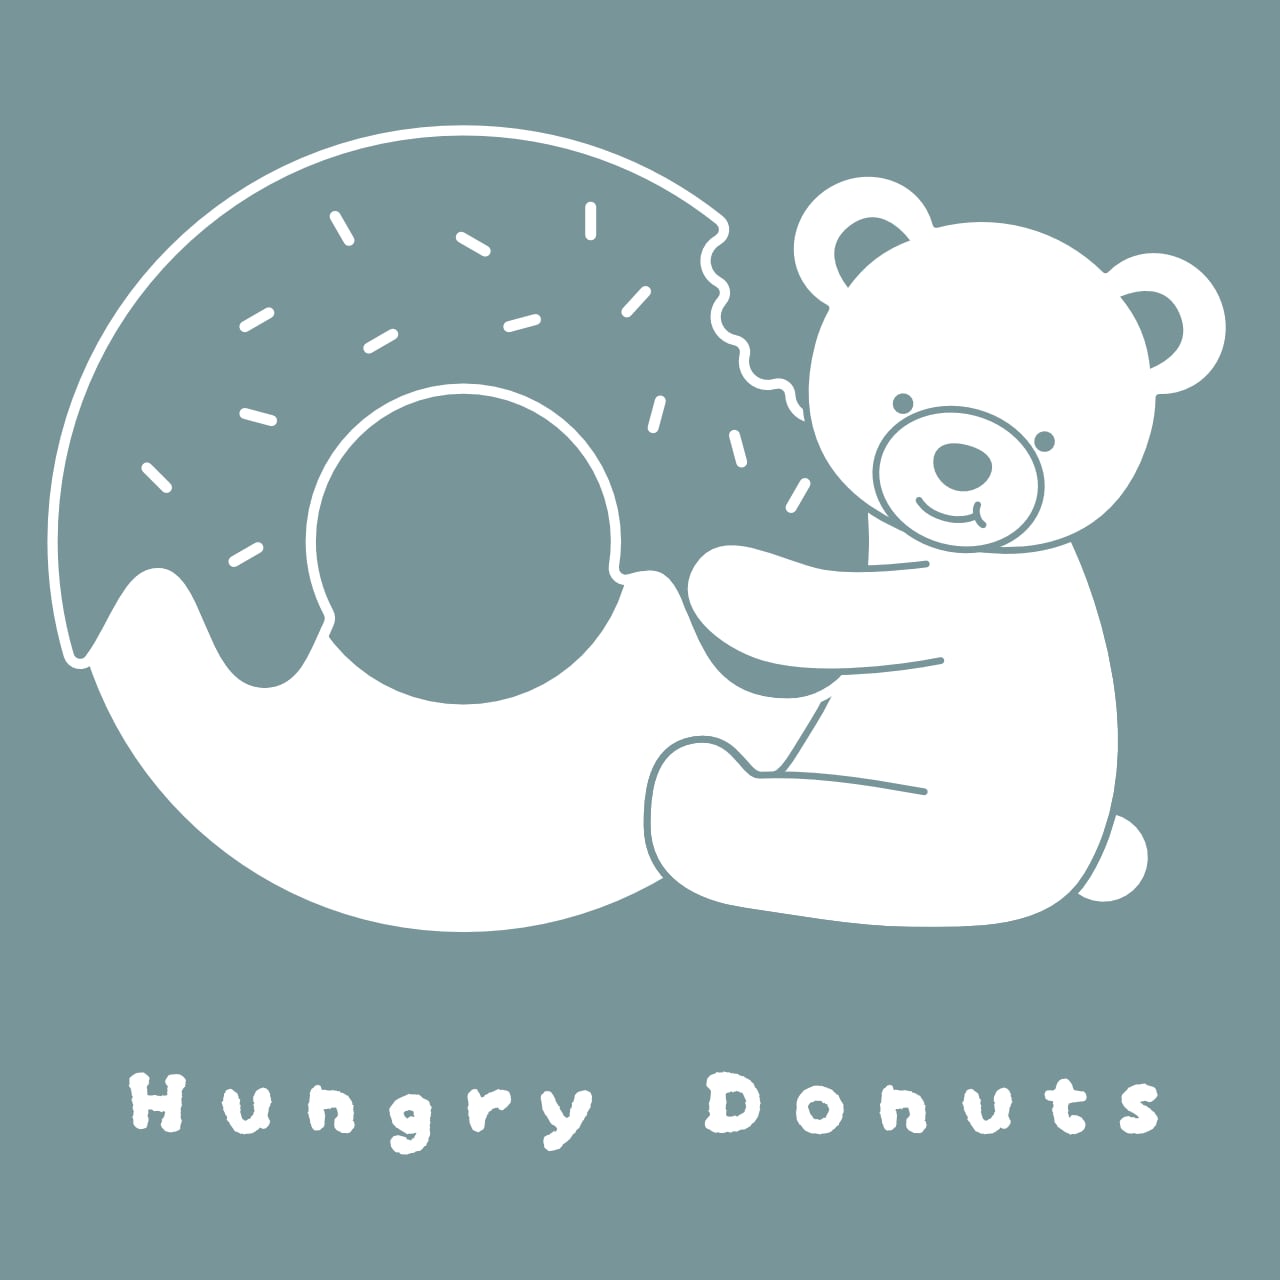 Hungry Donuts